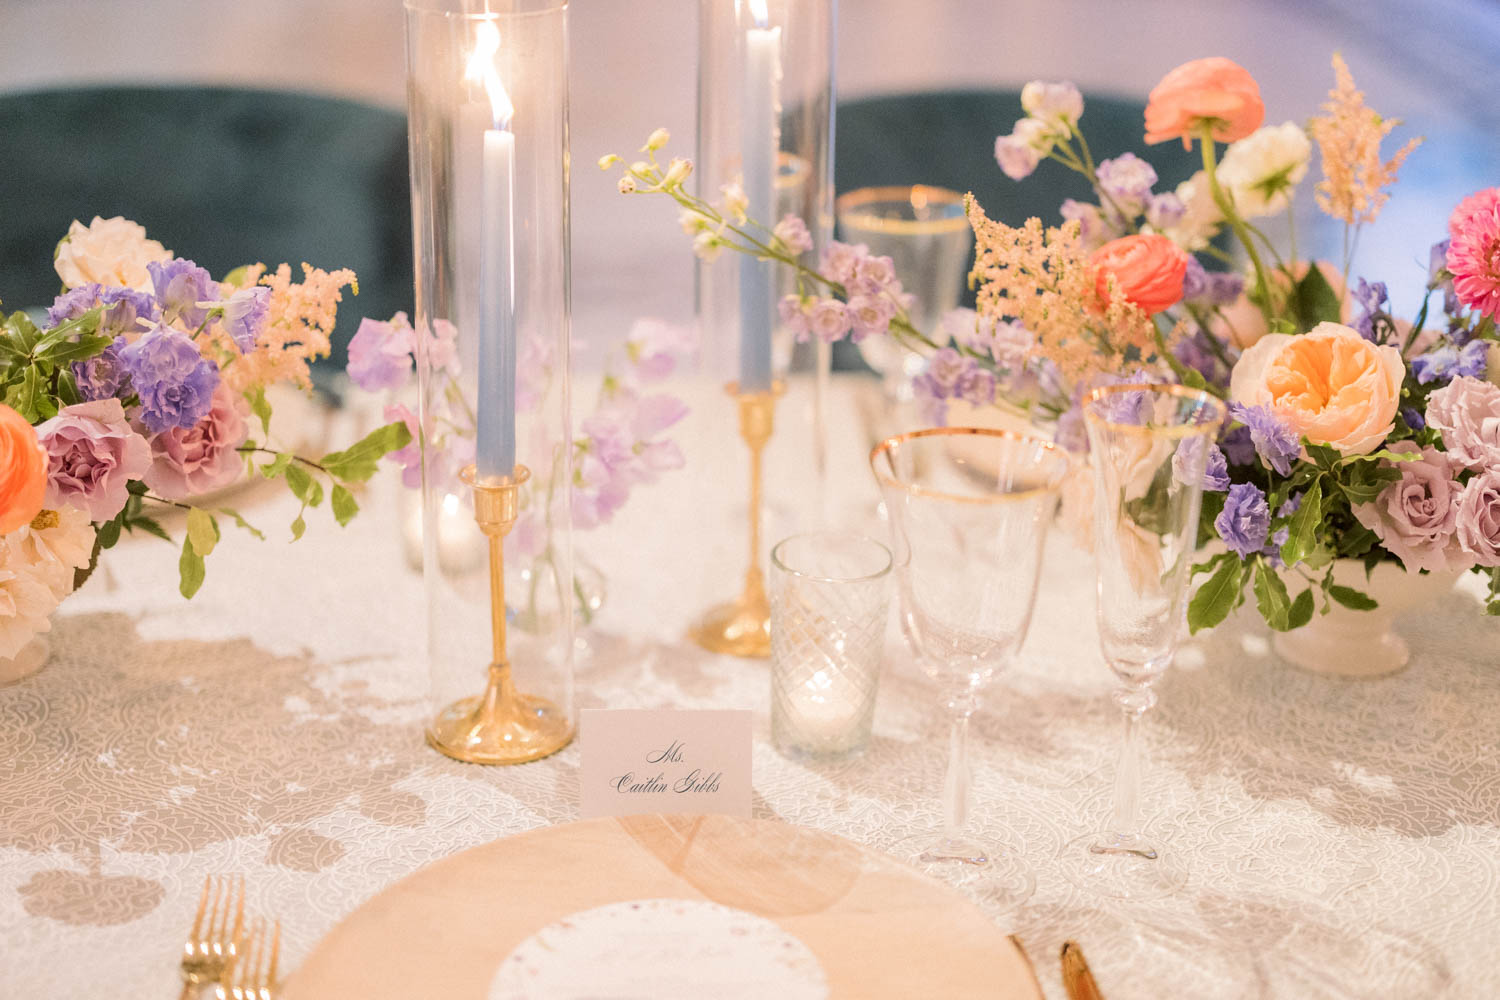 A romantic colorful wedding reception with blue tapered candles.